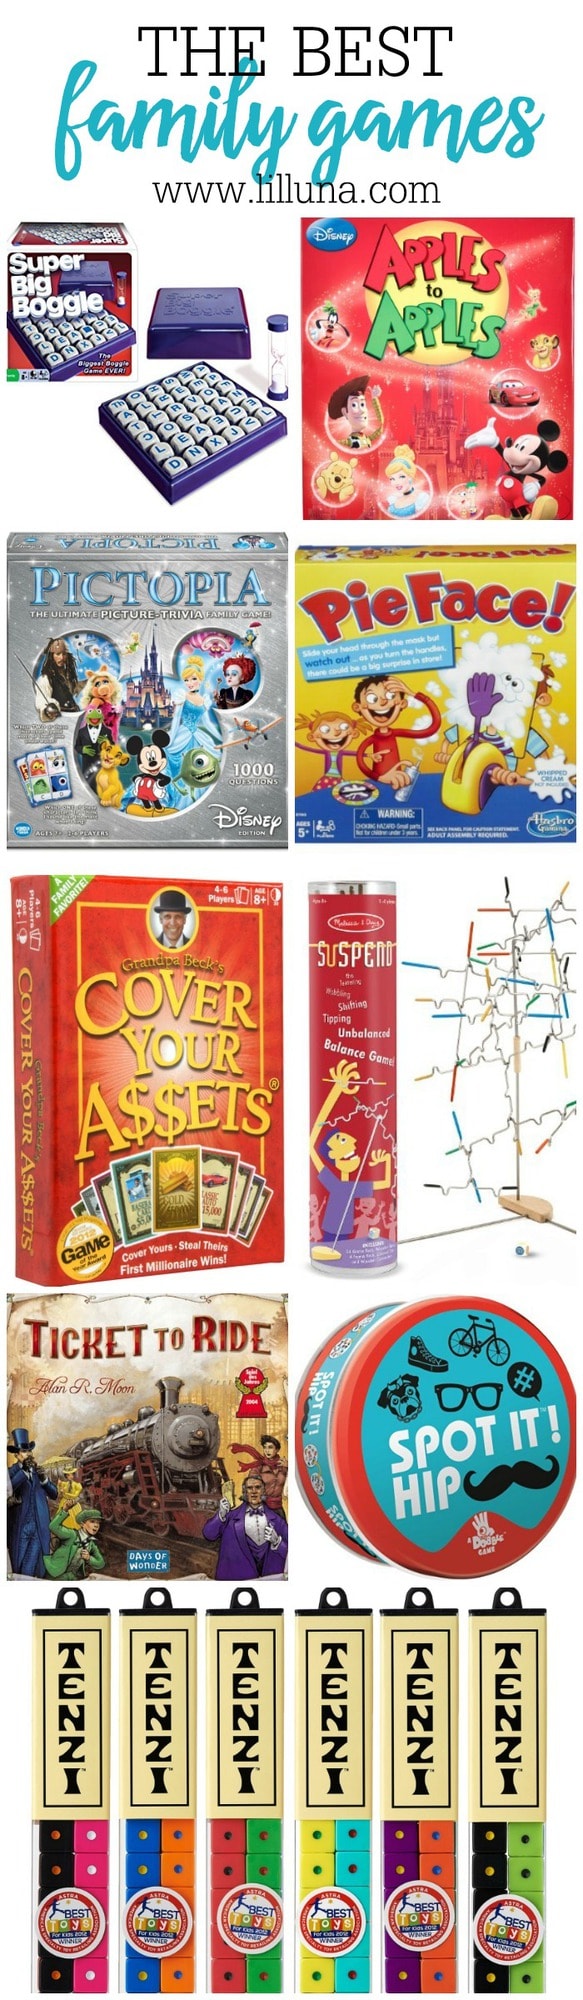 A collection of some of the BEST Family Games to collect and play with your family. They make great gift ideas too and provide hours of fun!!